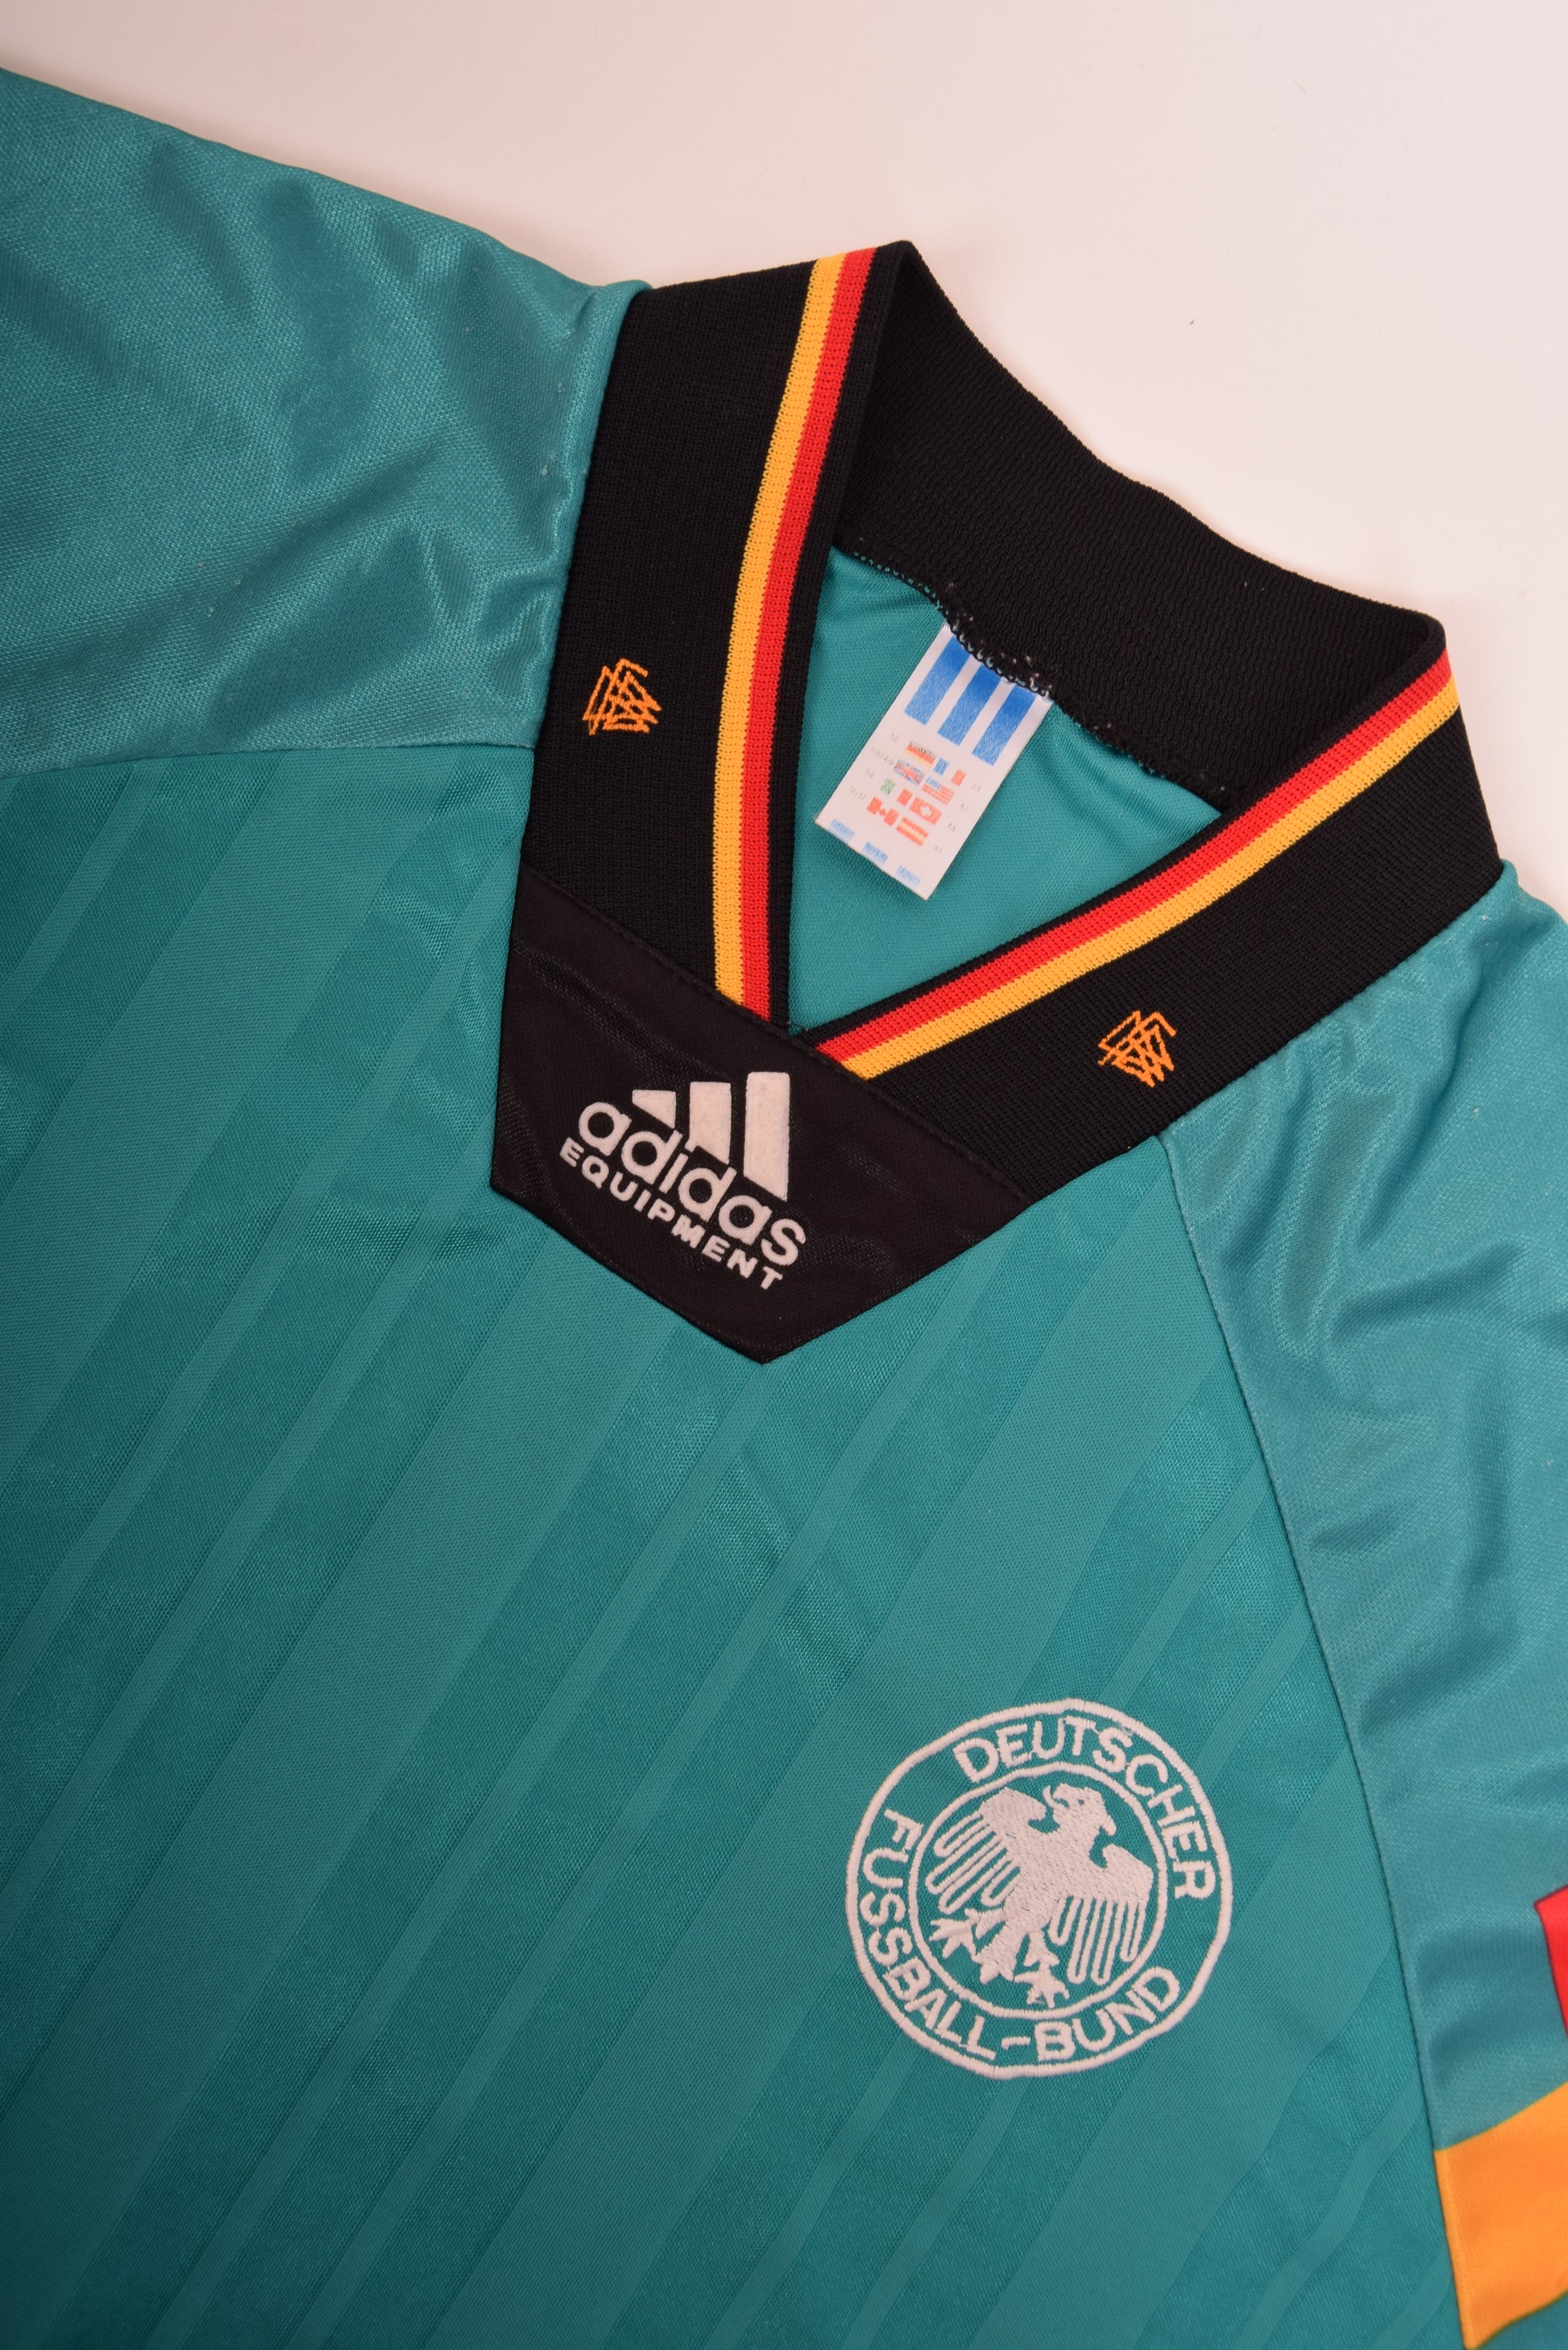 Vintage Germany Adidas 1992 - 1994 Away Football Shirt Size M Made in UK Green